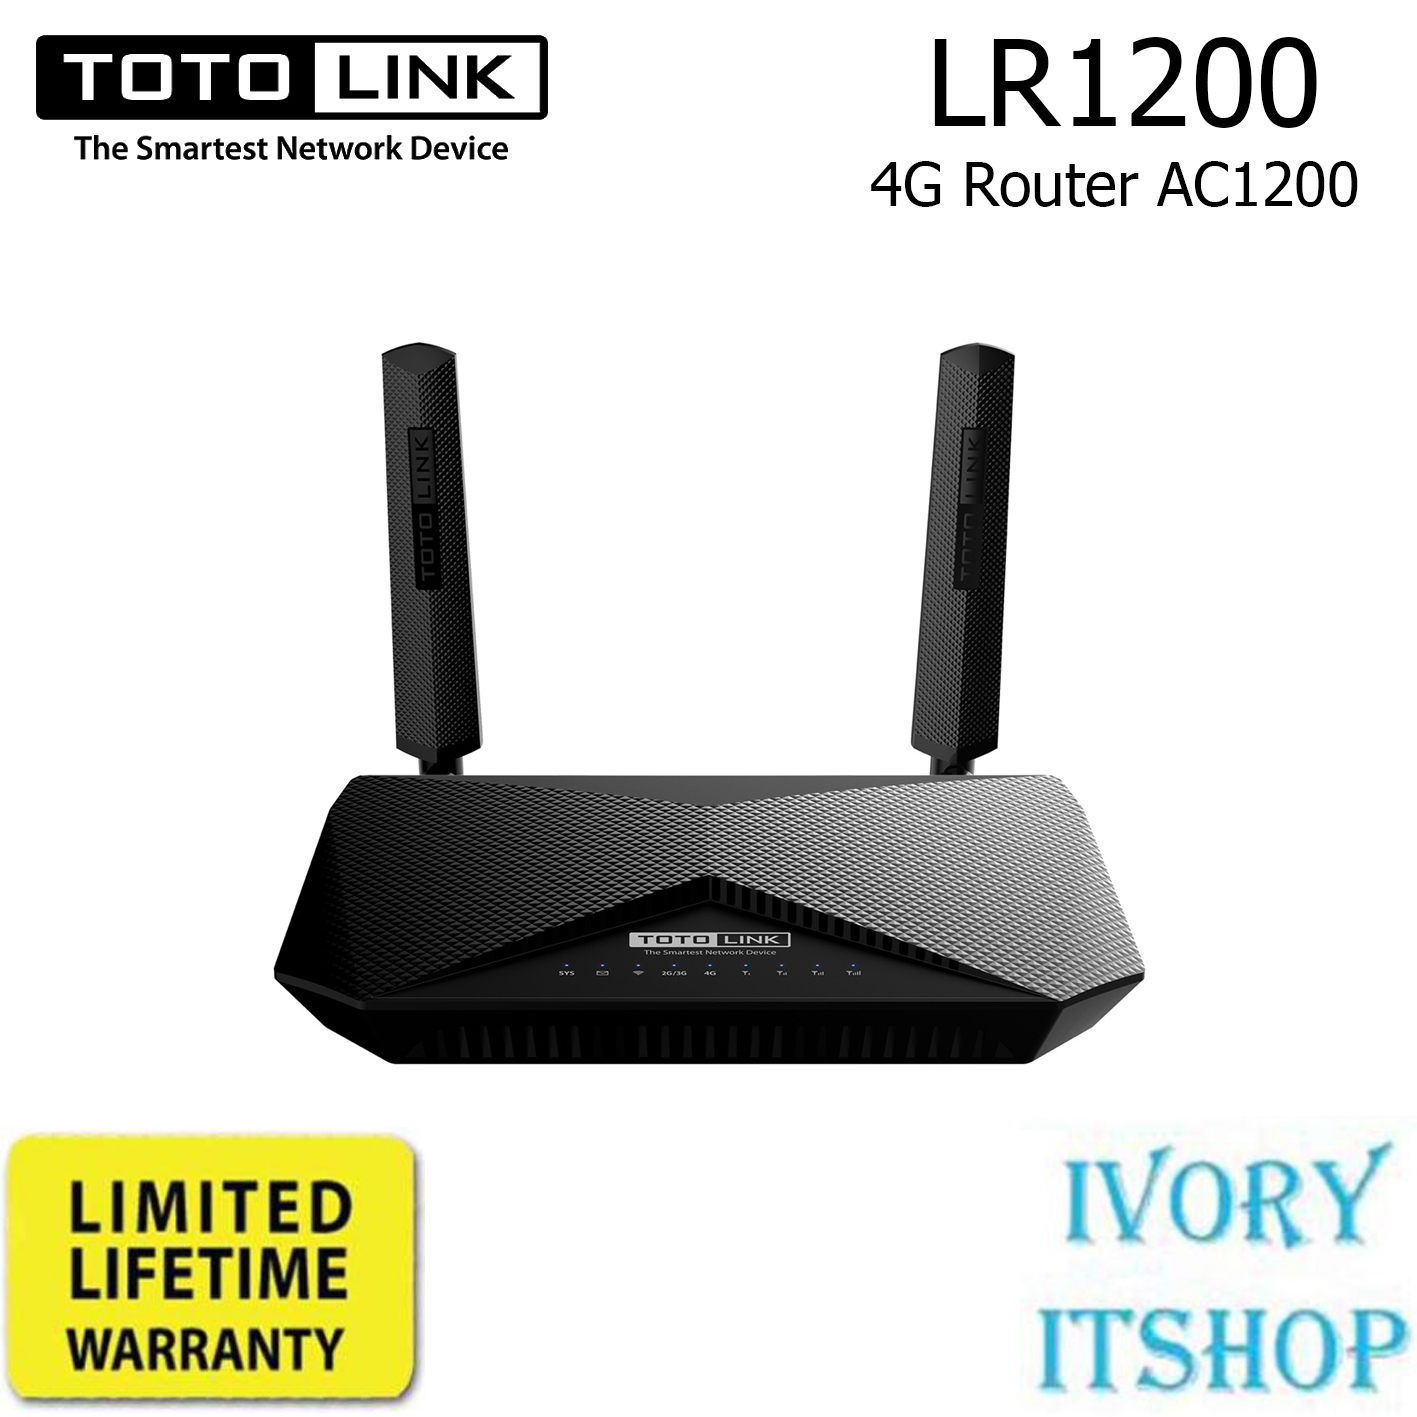 TOTOLINK LR1200 4G Router AC1200